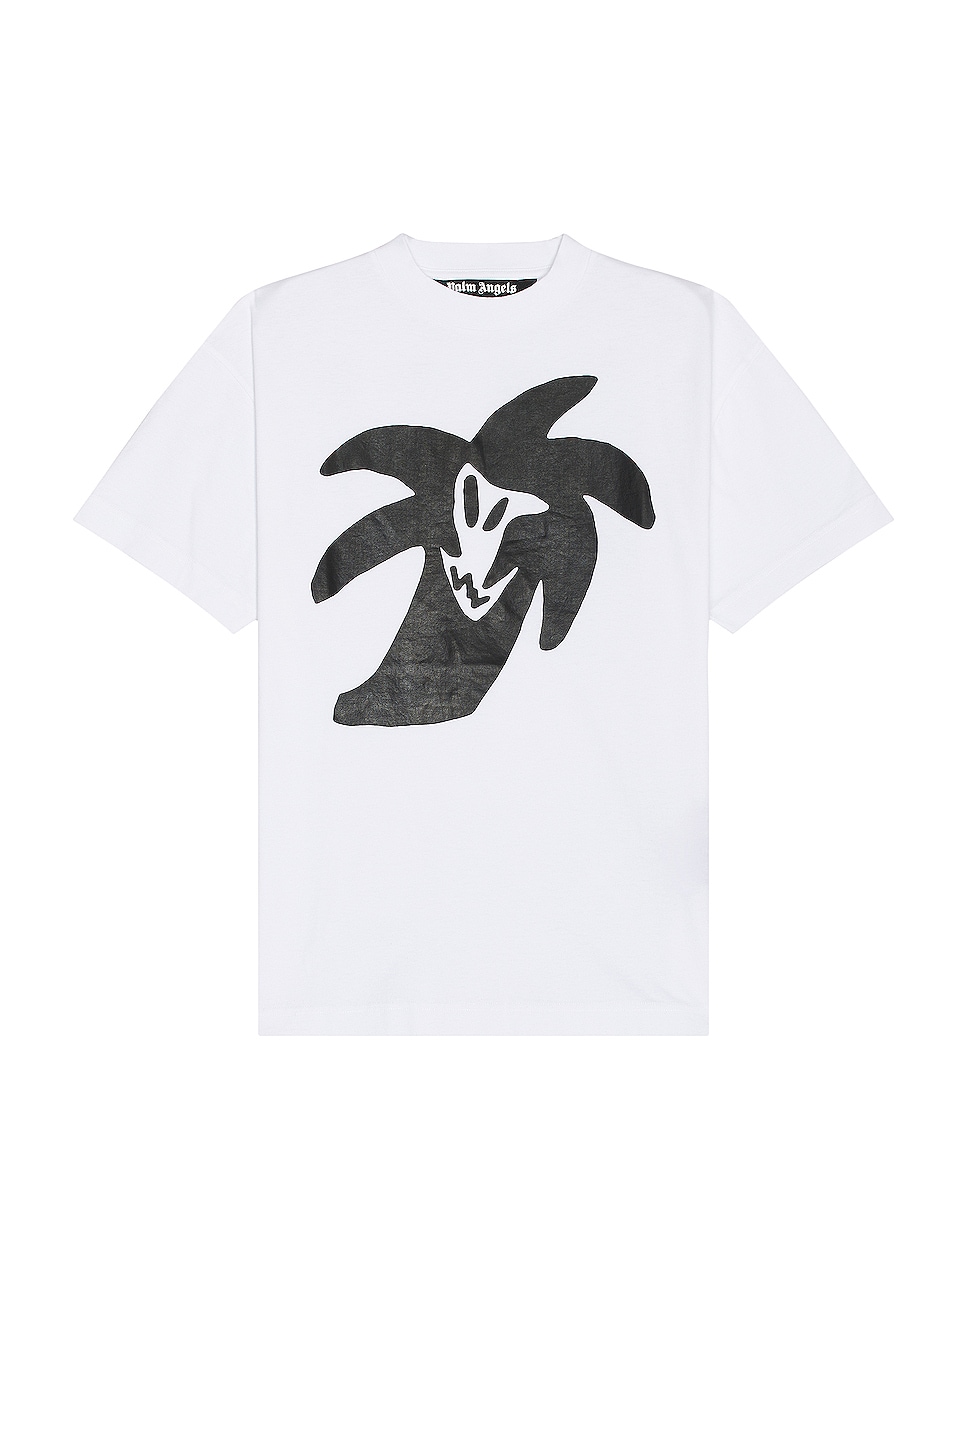 Image 1 of Palm Angels Palmity United Classic Tee in White & Black